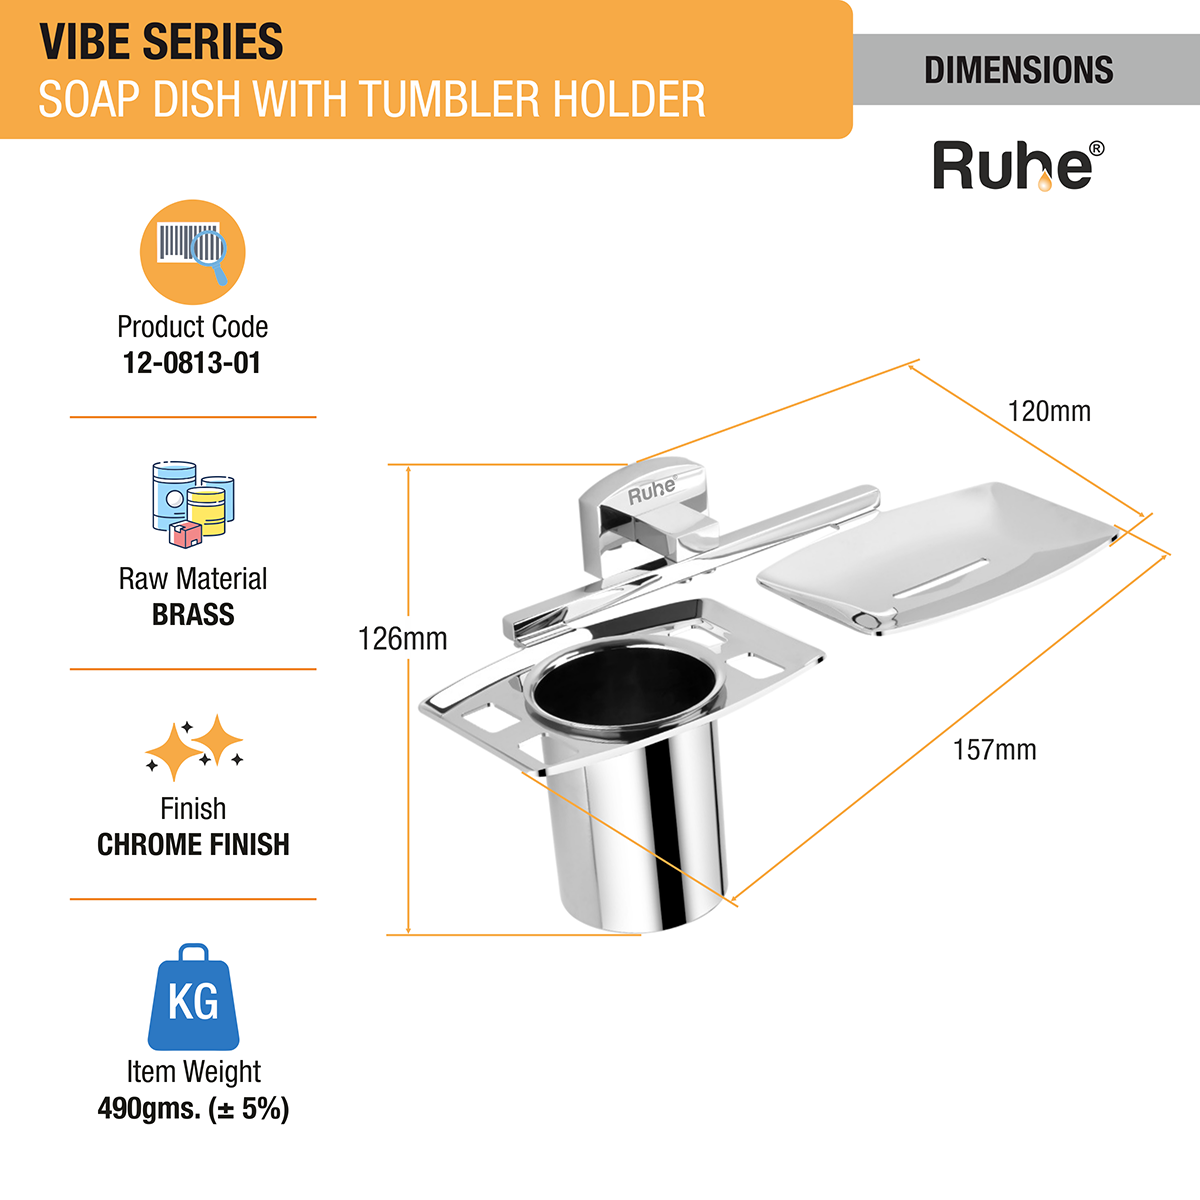 Vibe Brass Soap Dish with Tumbler Holder dimensions and size